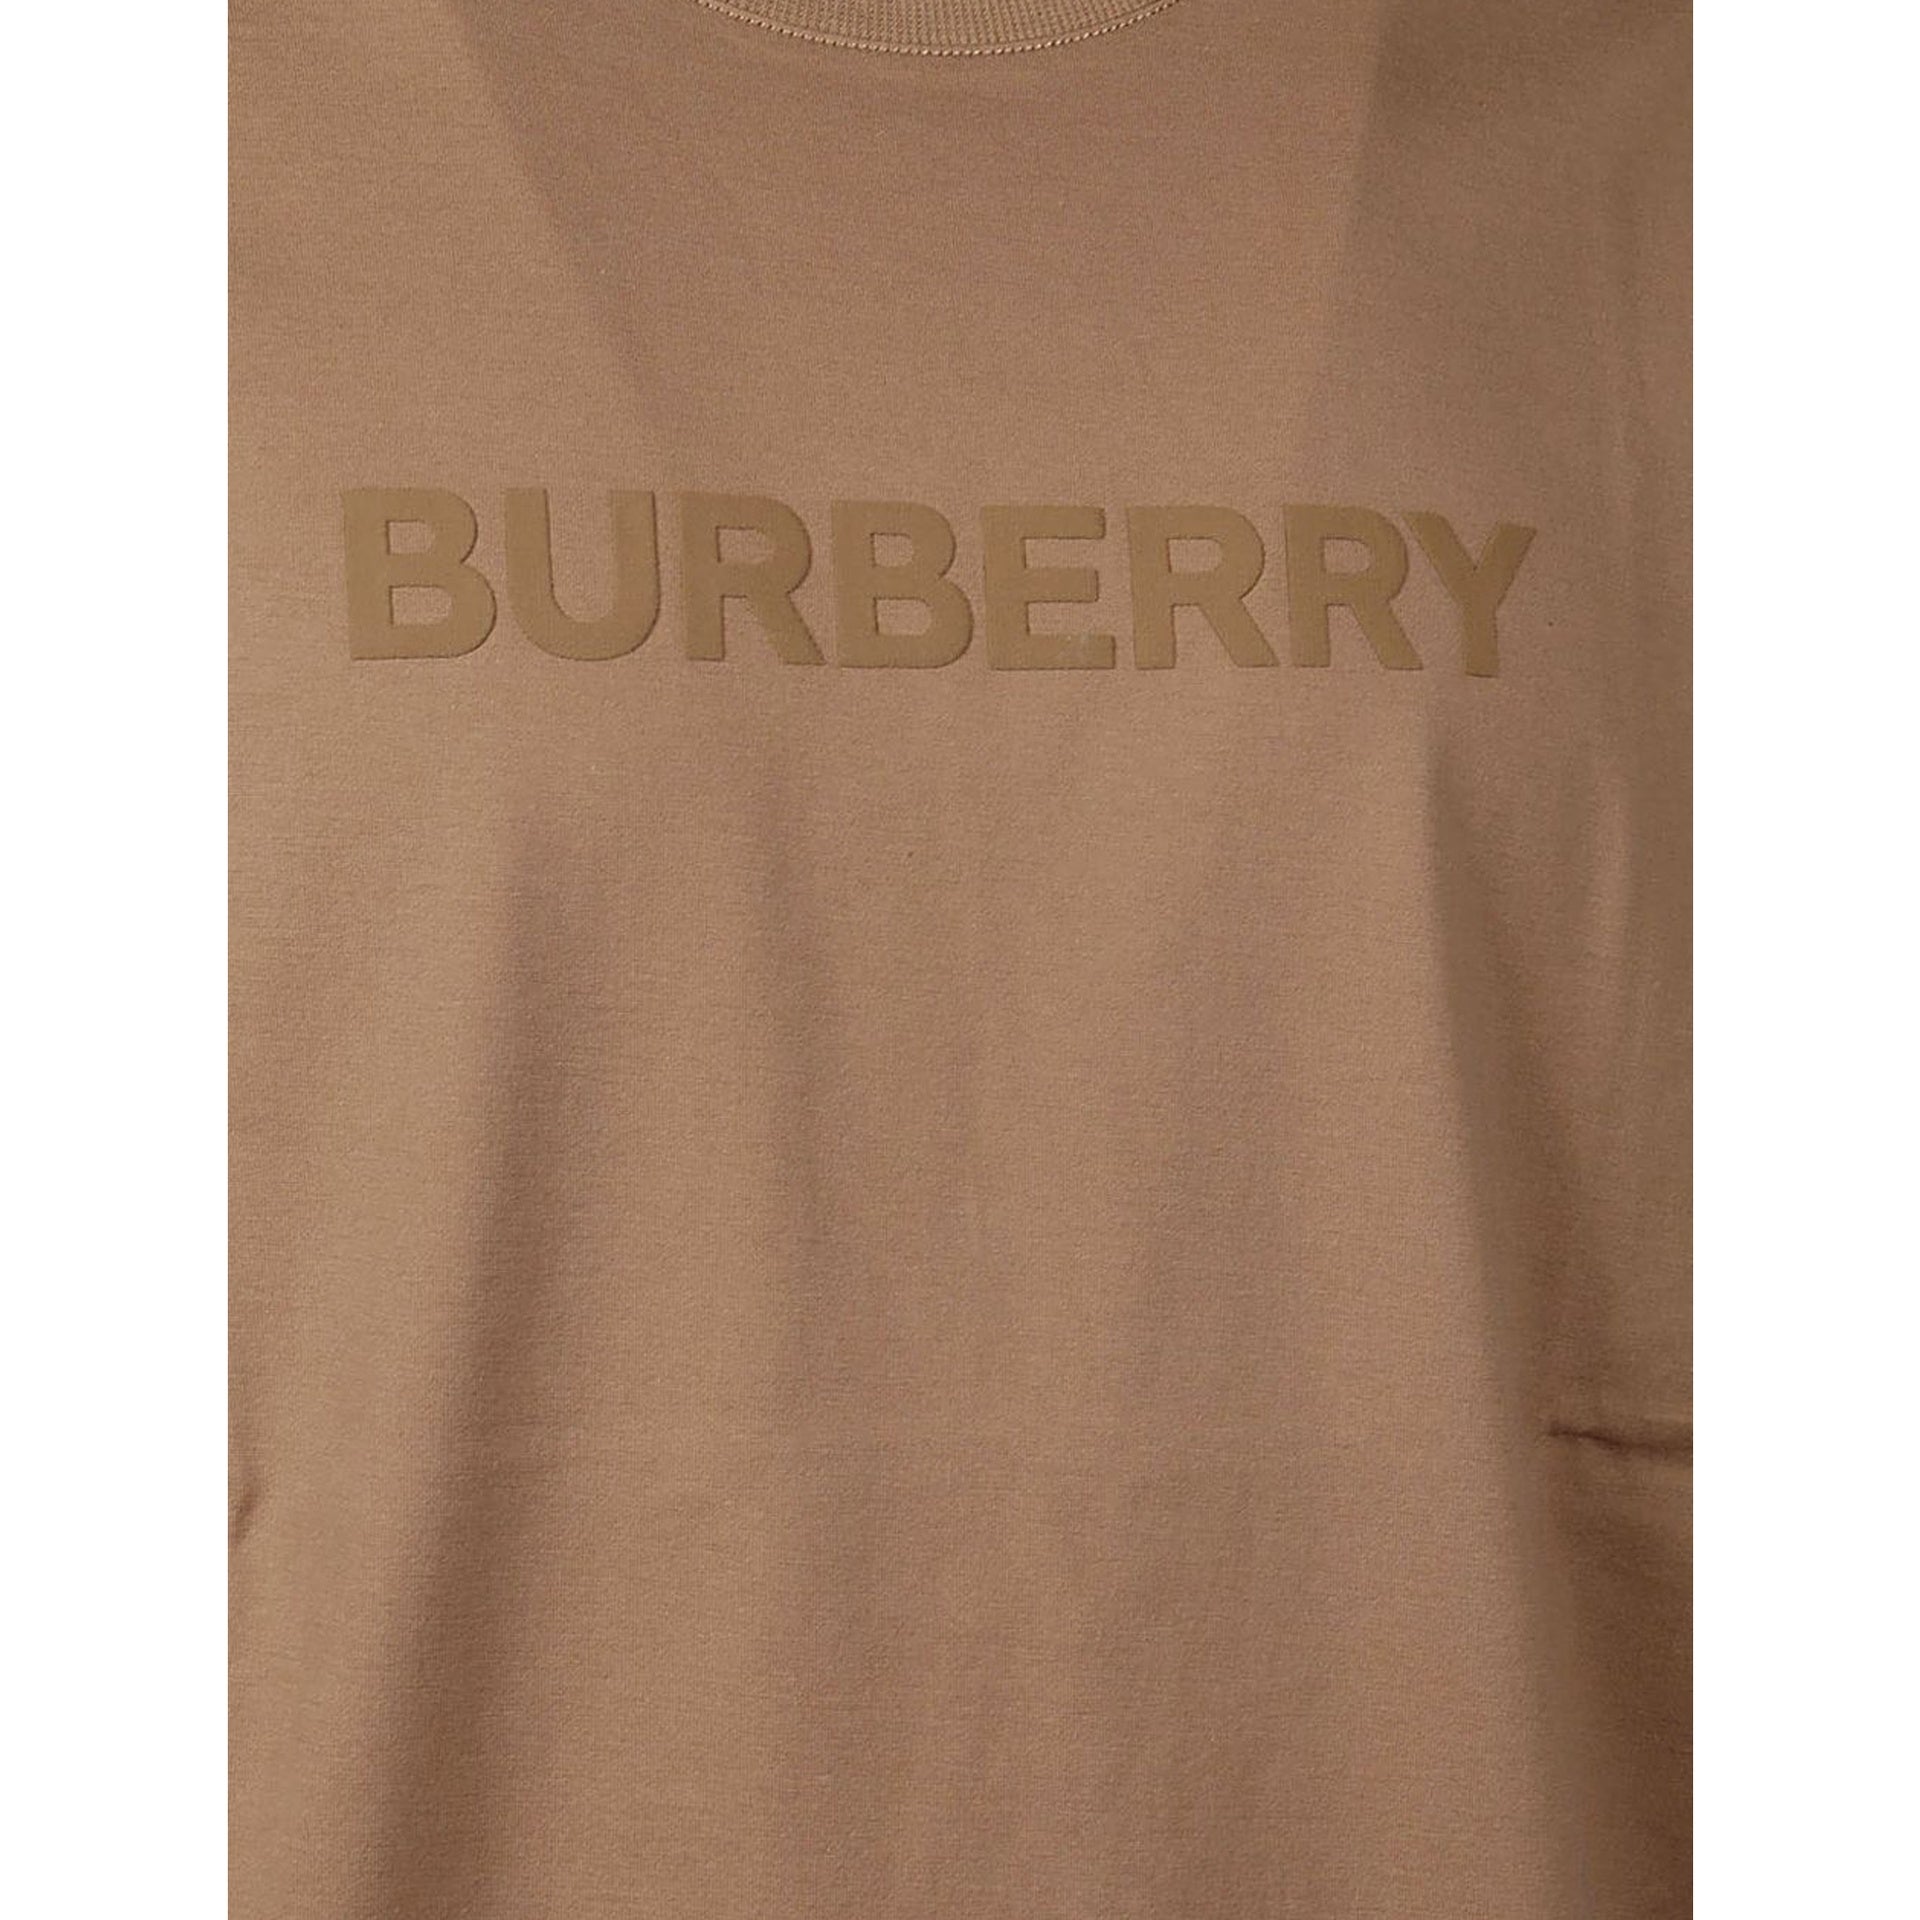 BURBERRY-OUTLET-SALE-Burberry-Harriston-Logo-T-Shirt-Shirts-ARCHIVE-COLLECTION-3.jpg